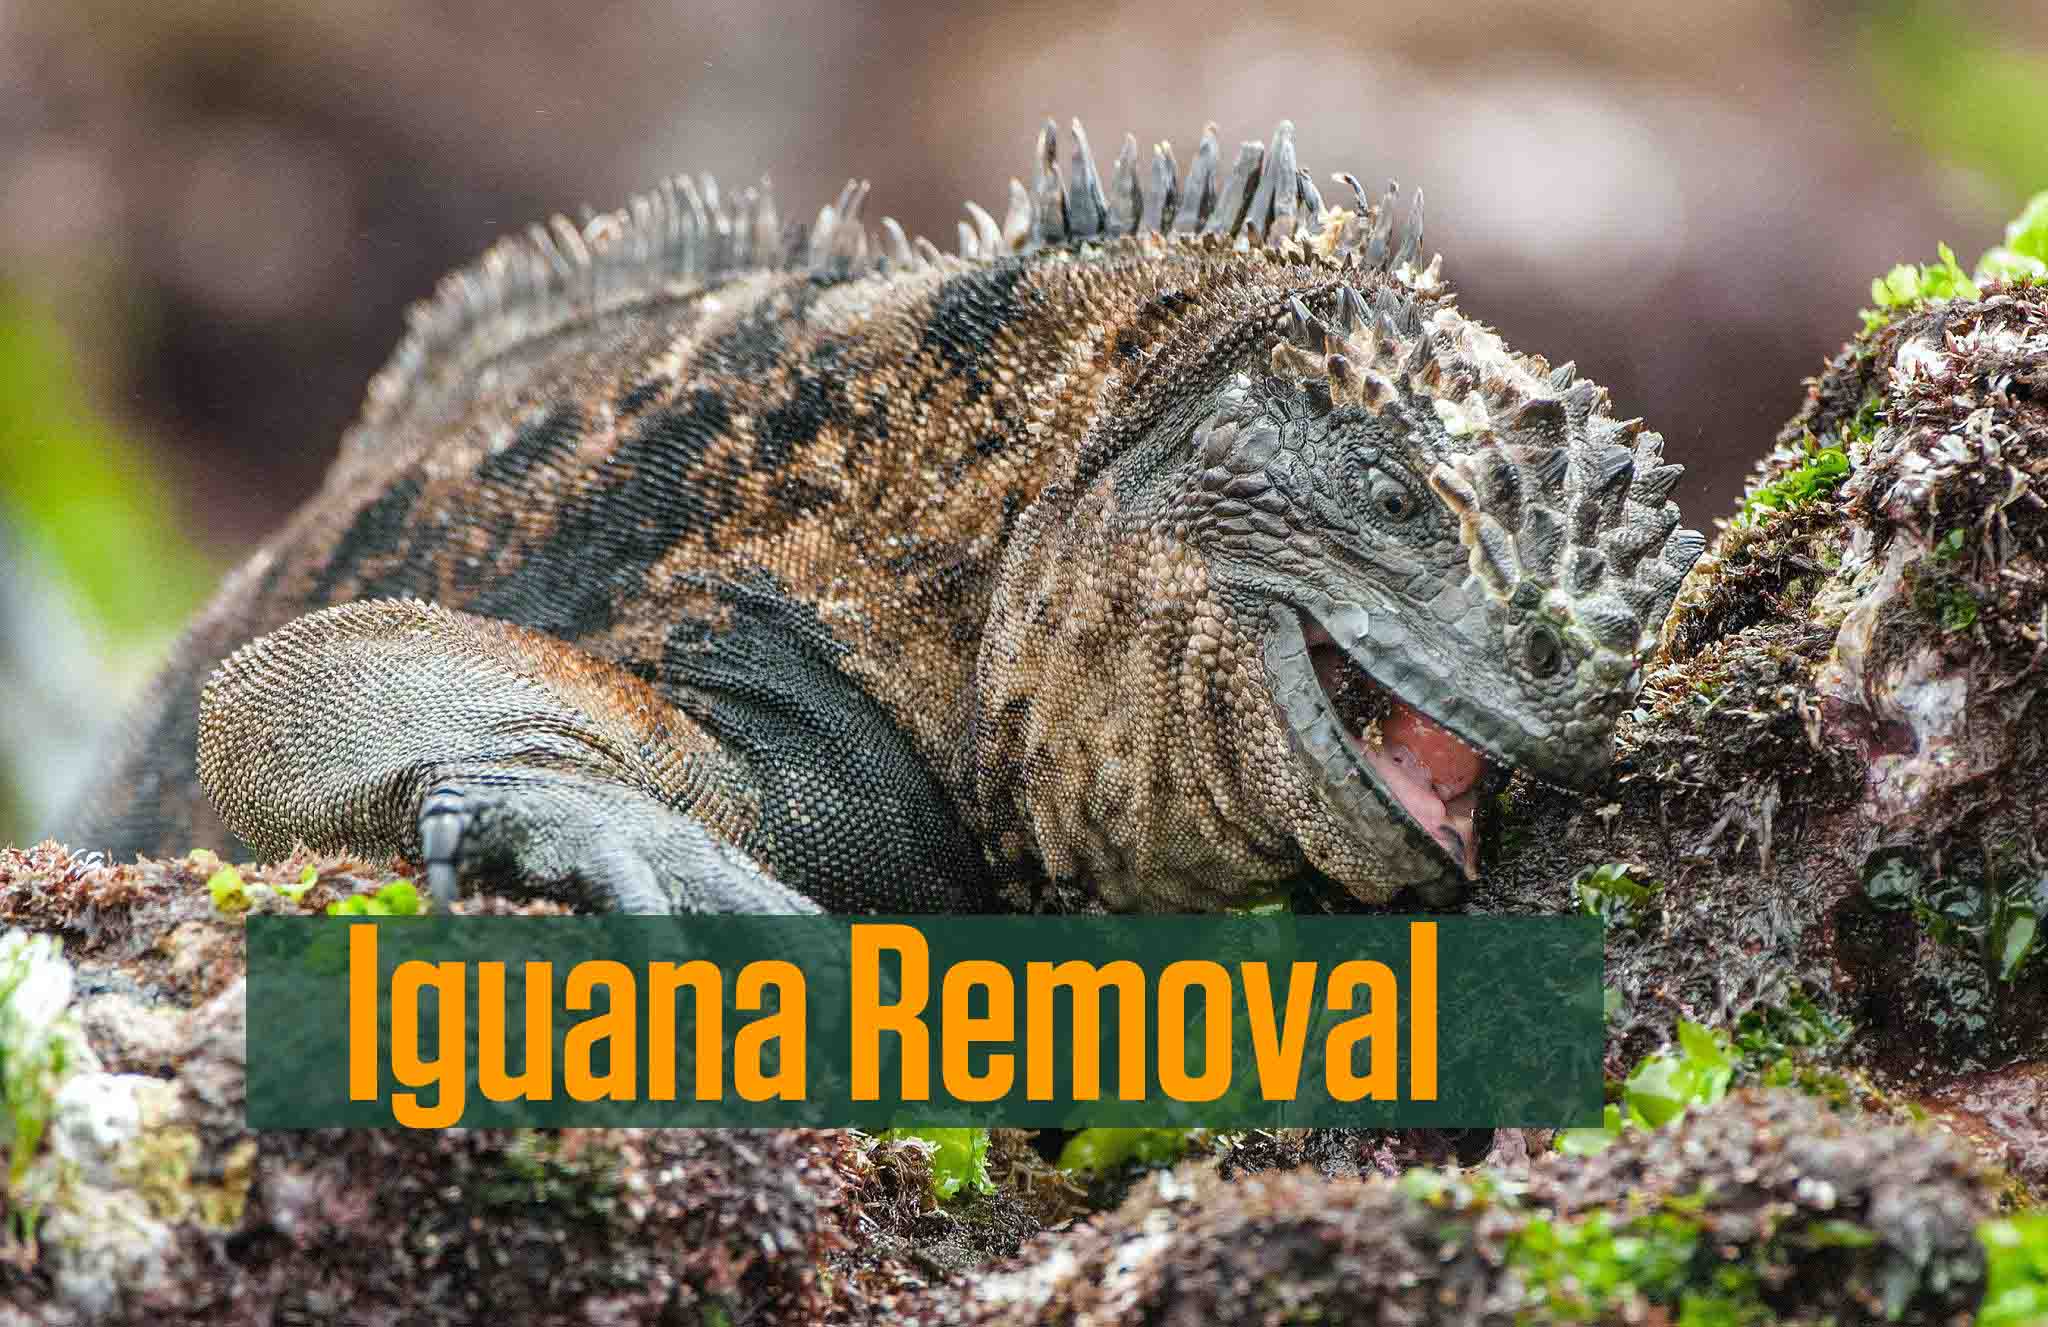 how to start an iguana removal business